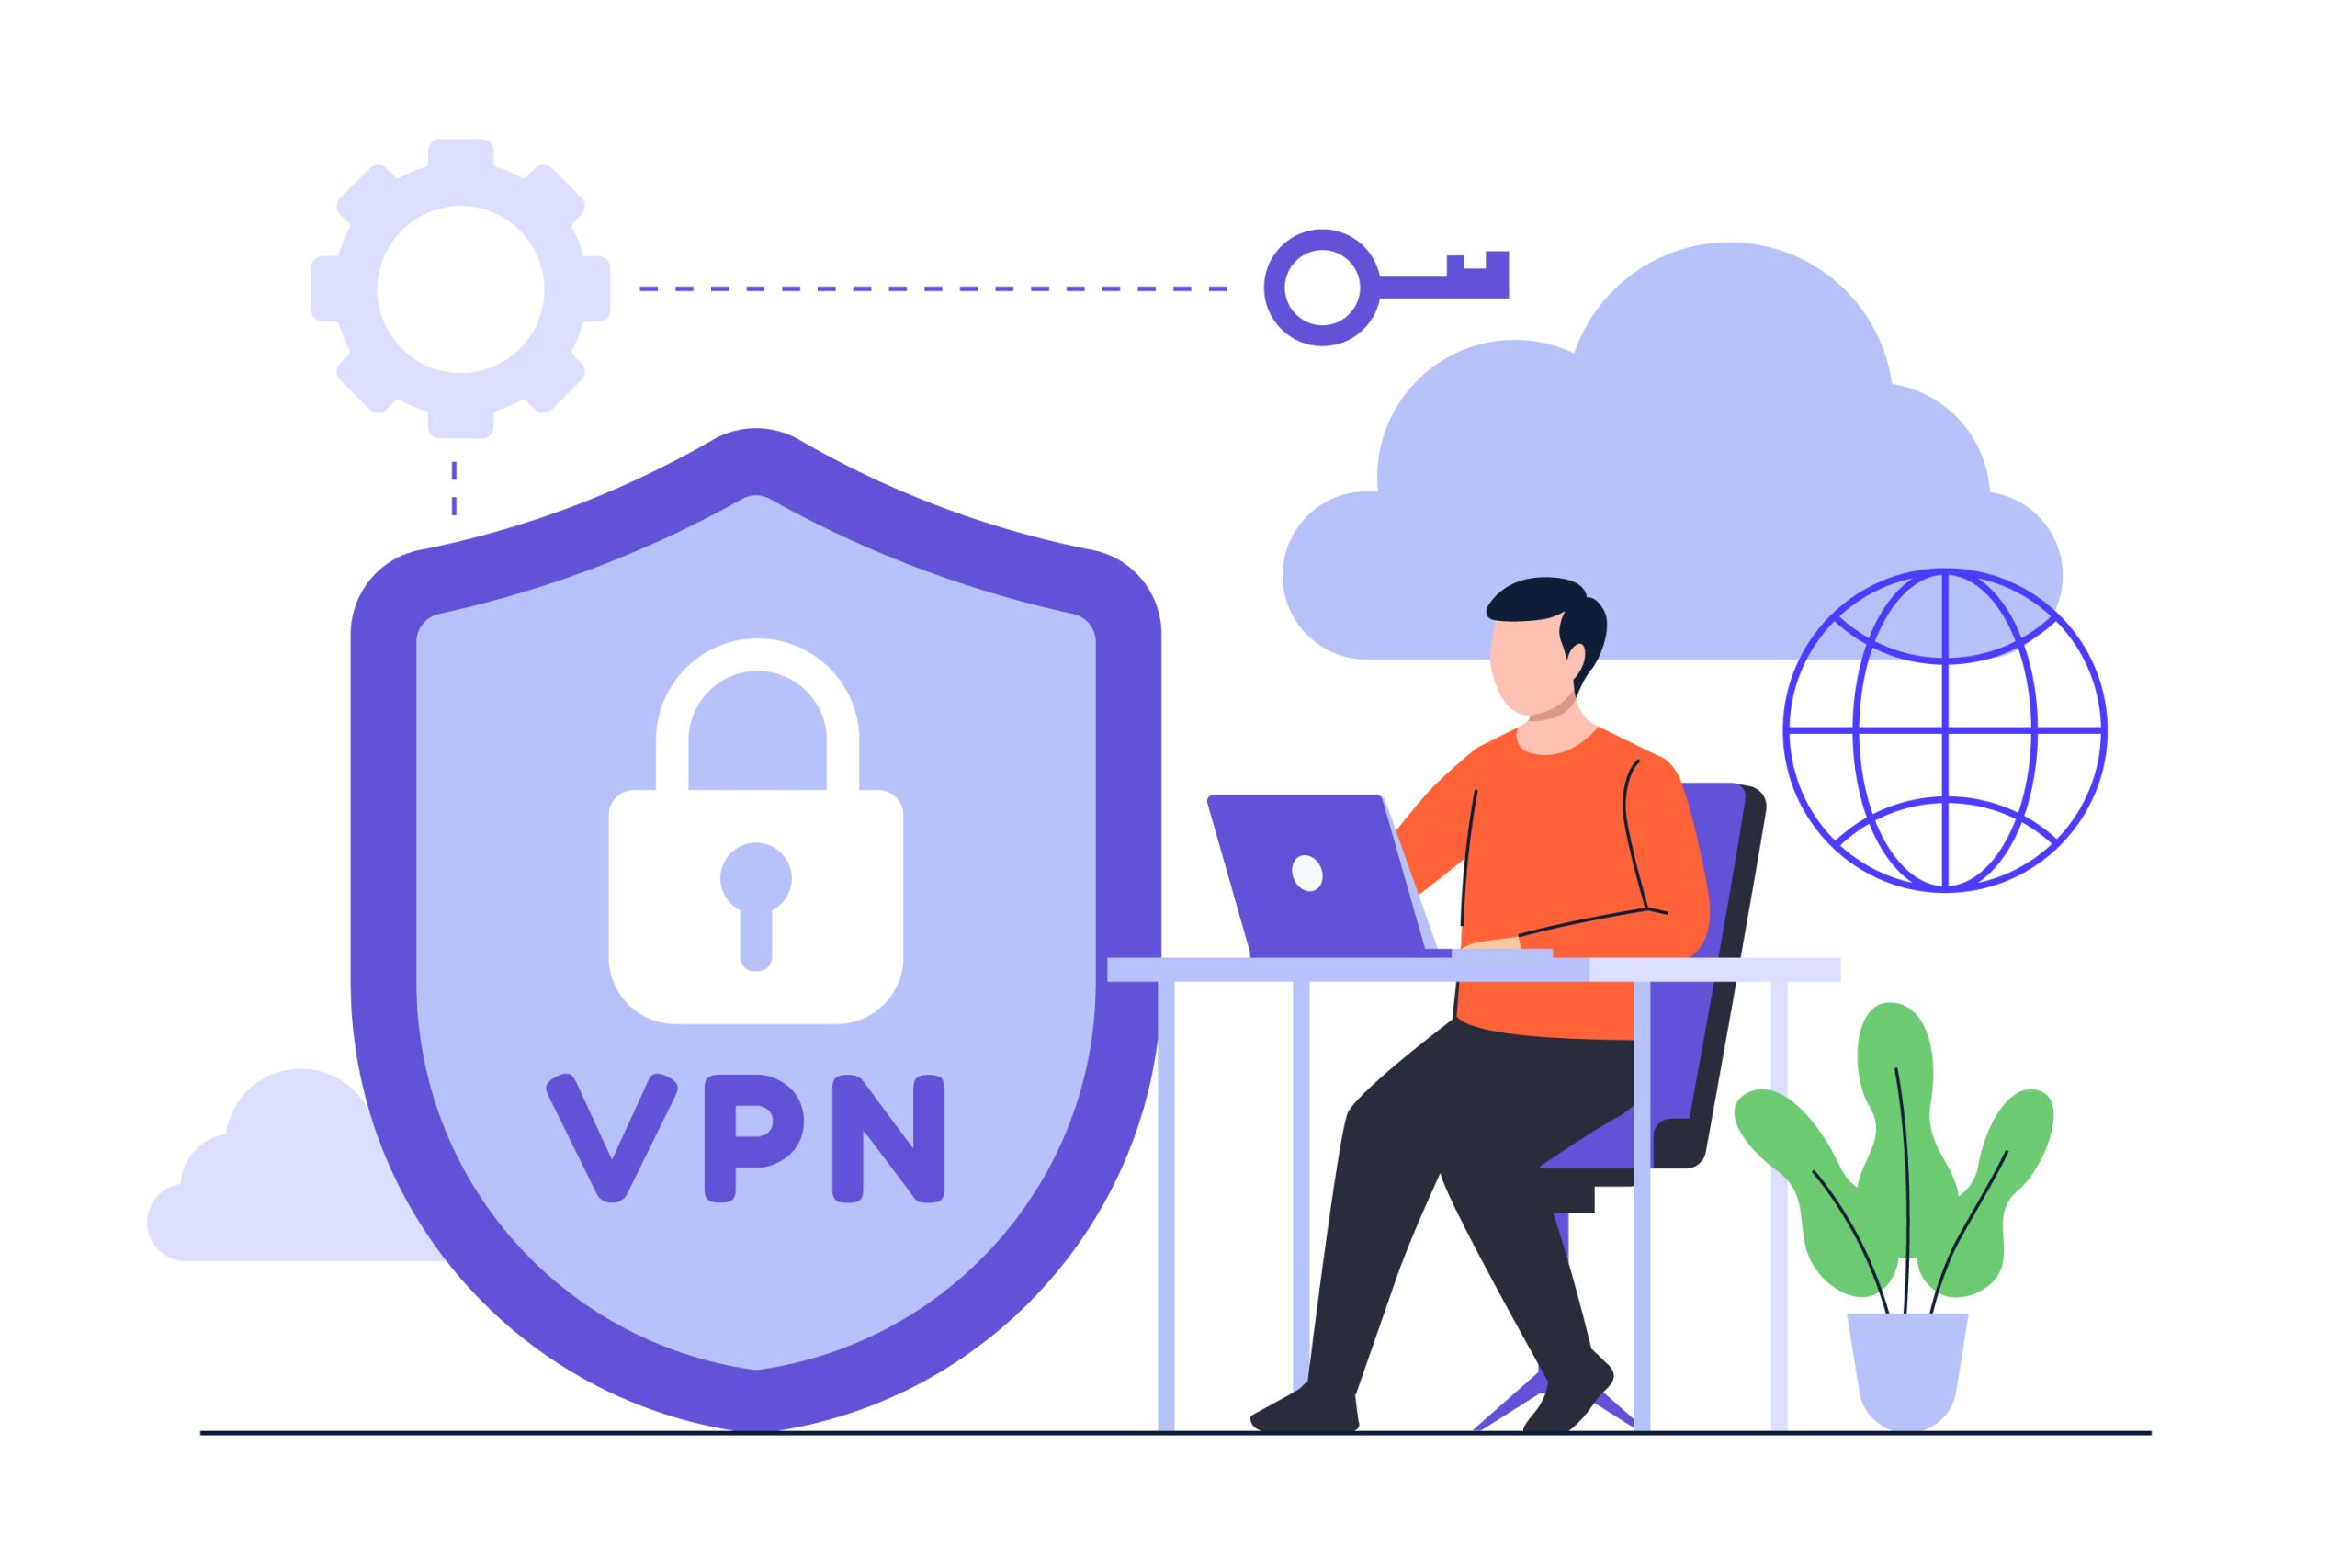 Secura VPN: The VPN for People Who Value Privacy